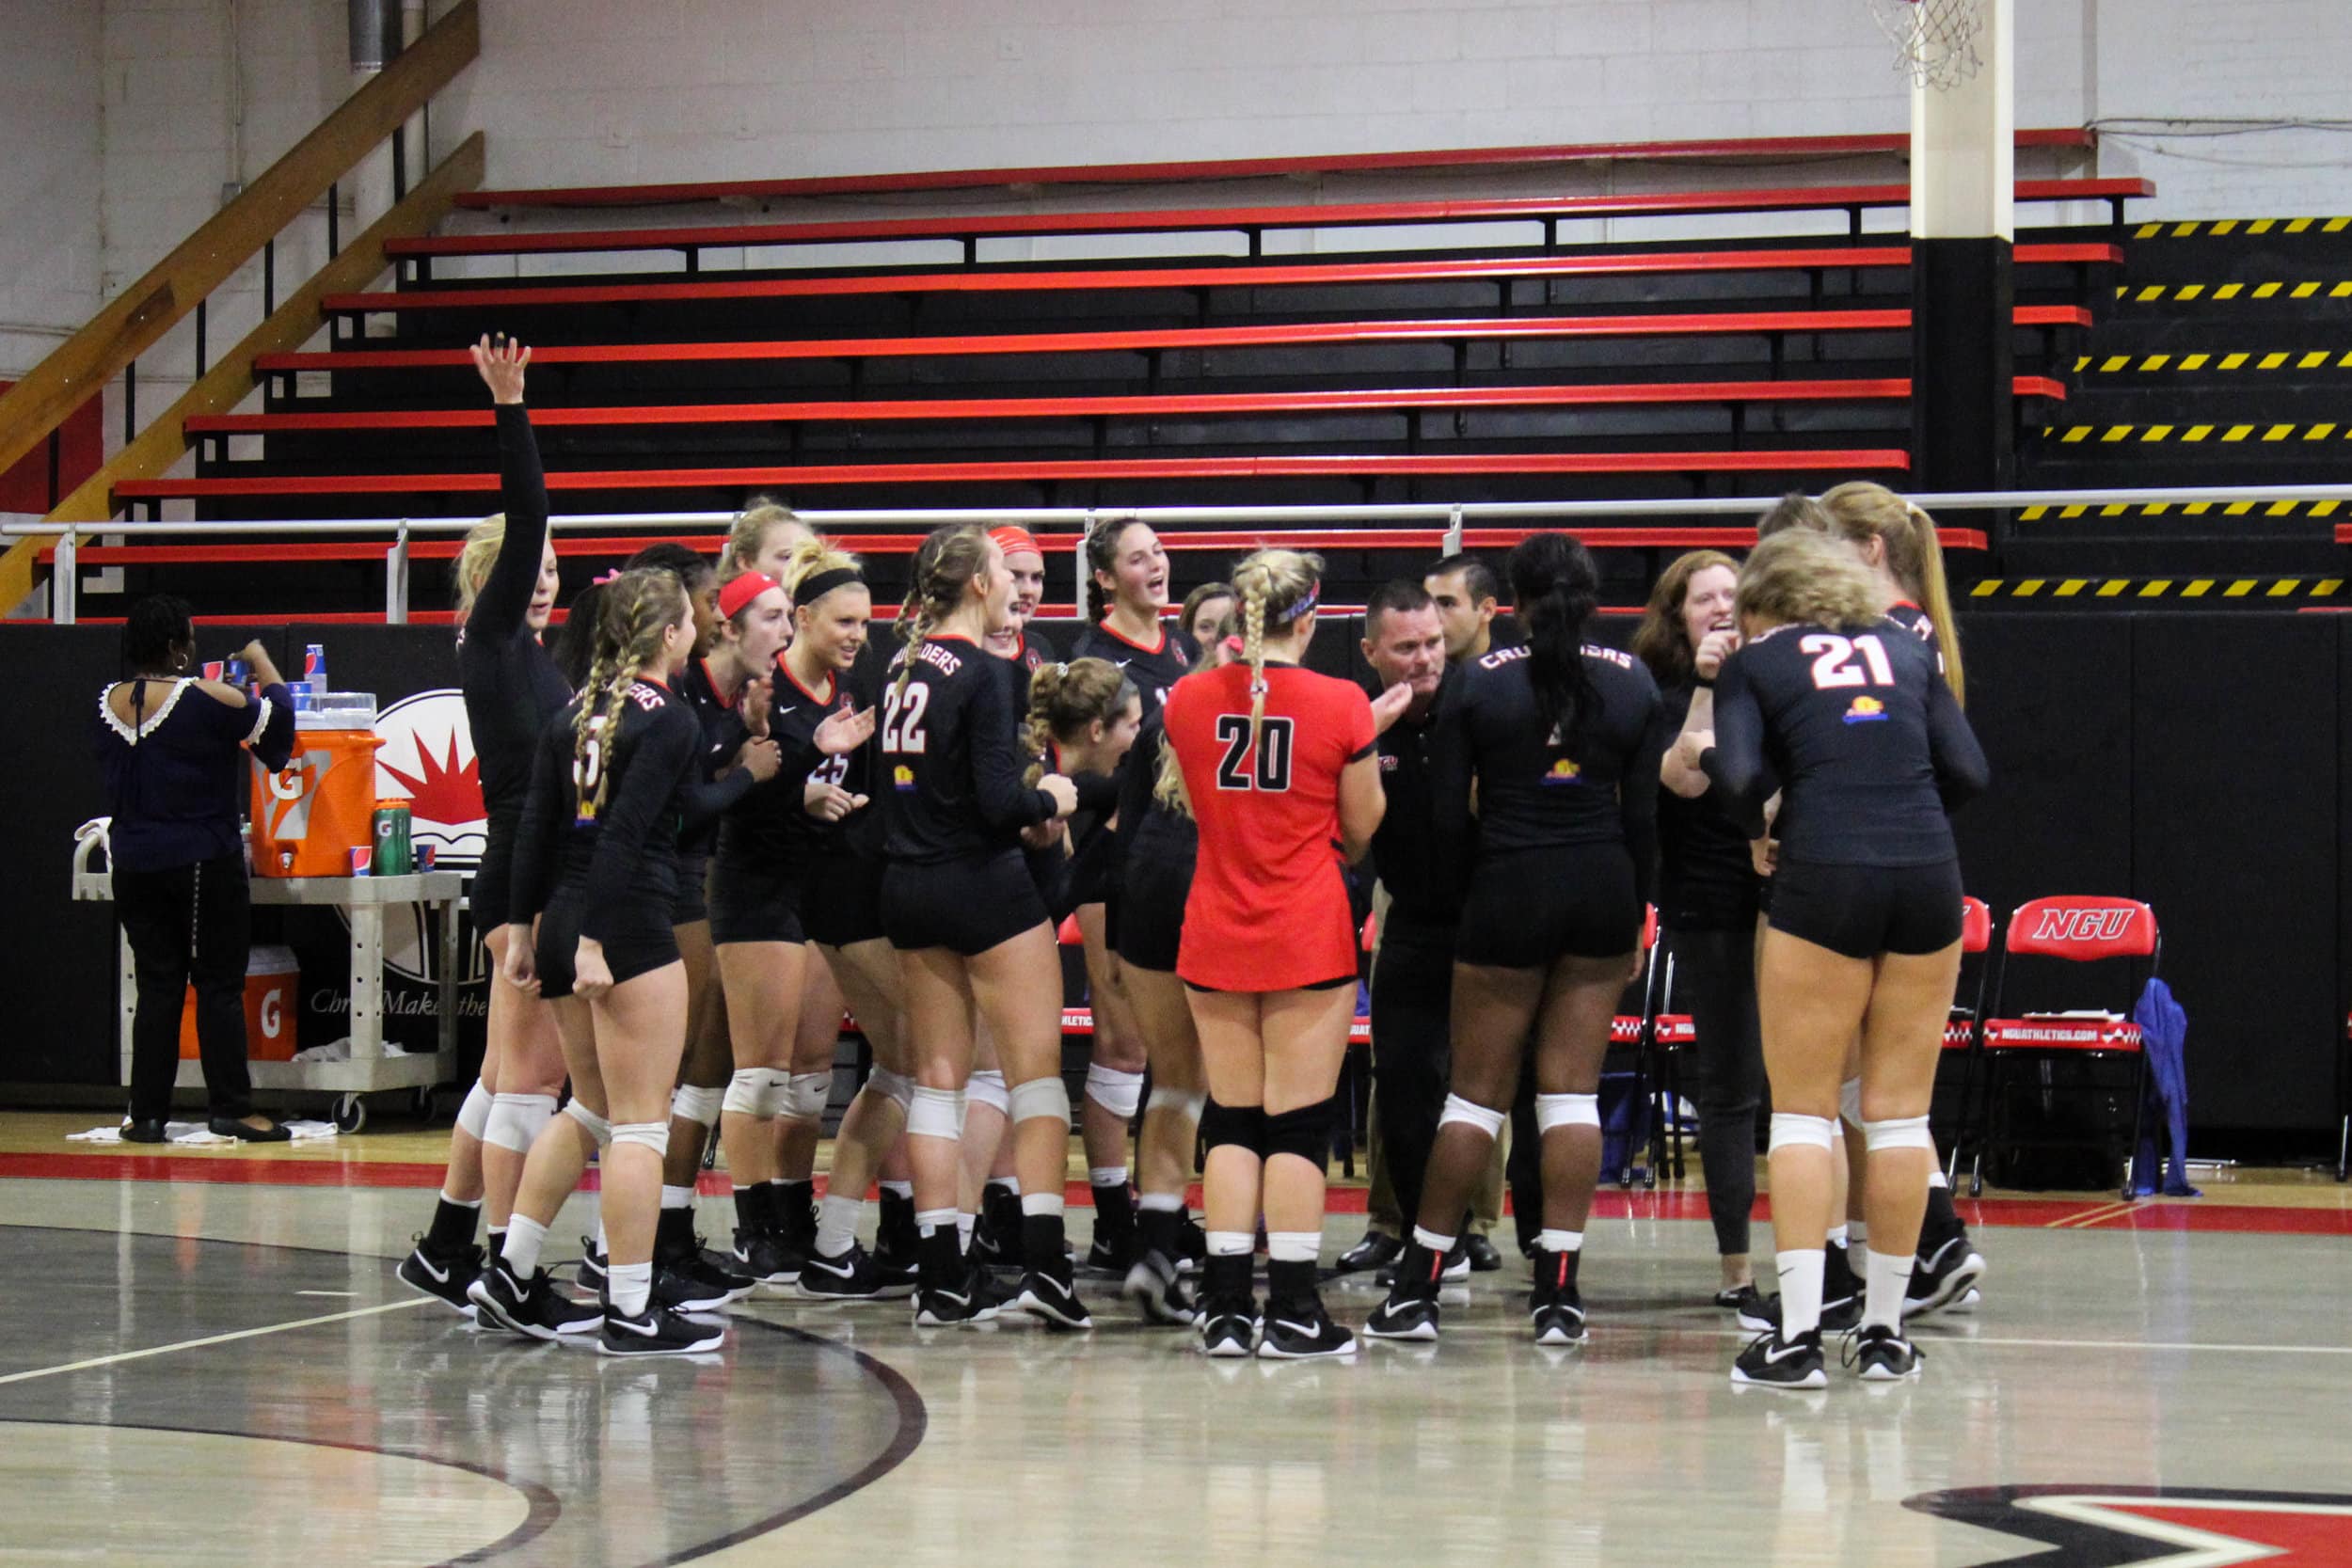 After winning a set, the NGU womens volleyball team huddle together to cheer on the players that were on the court.